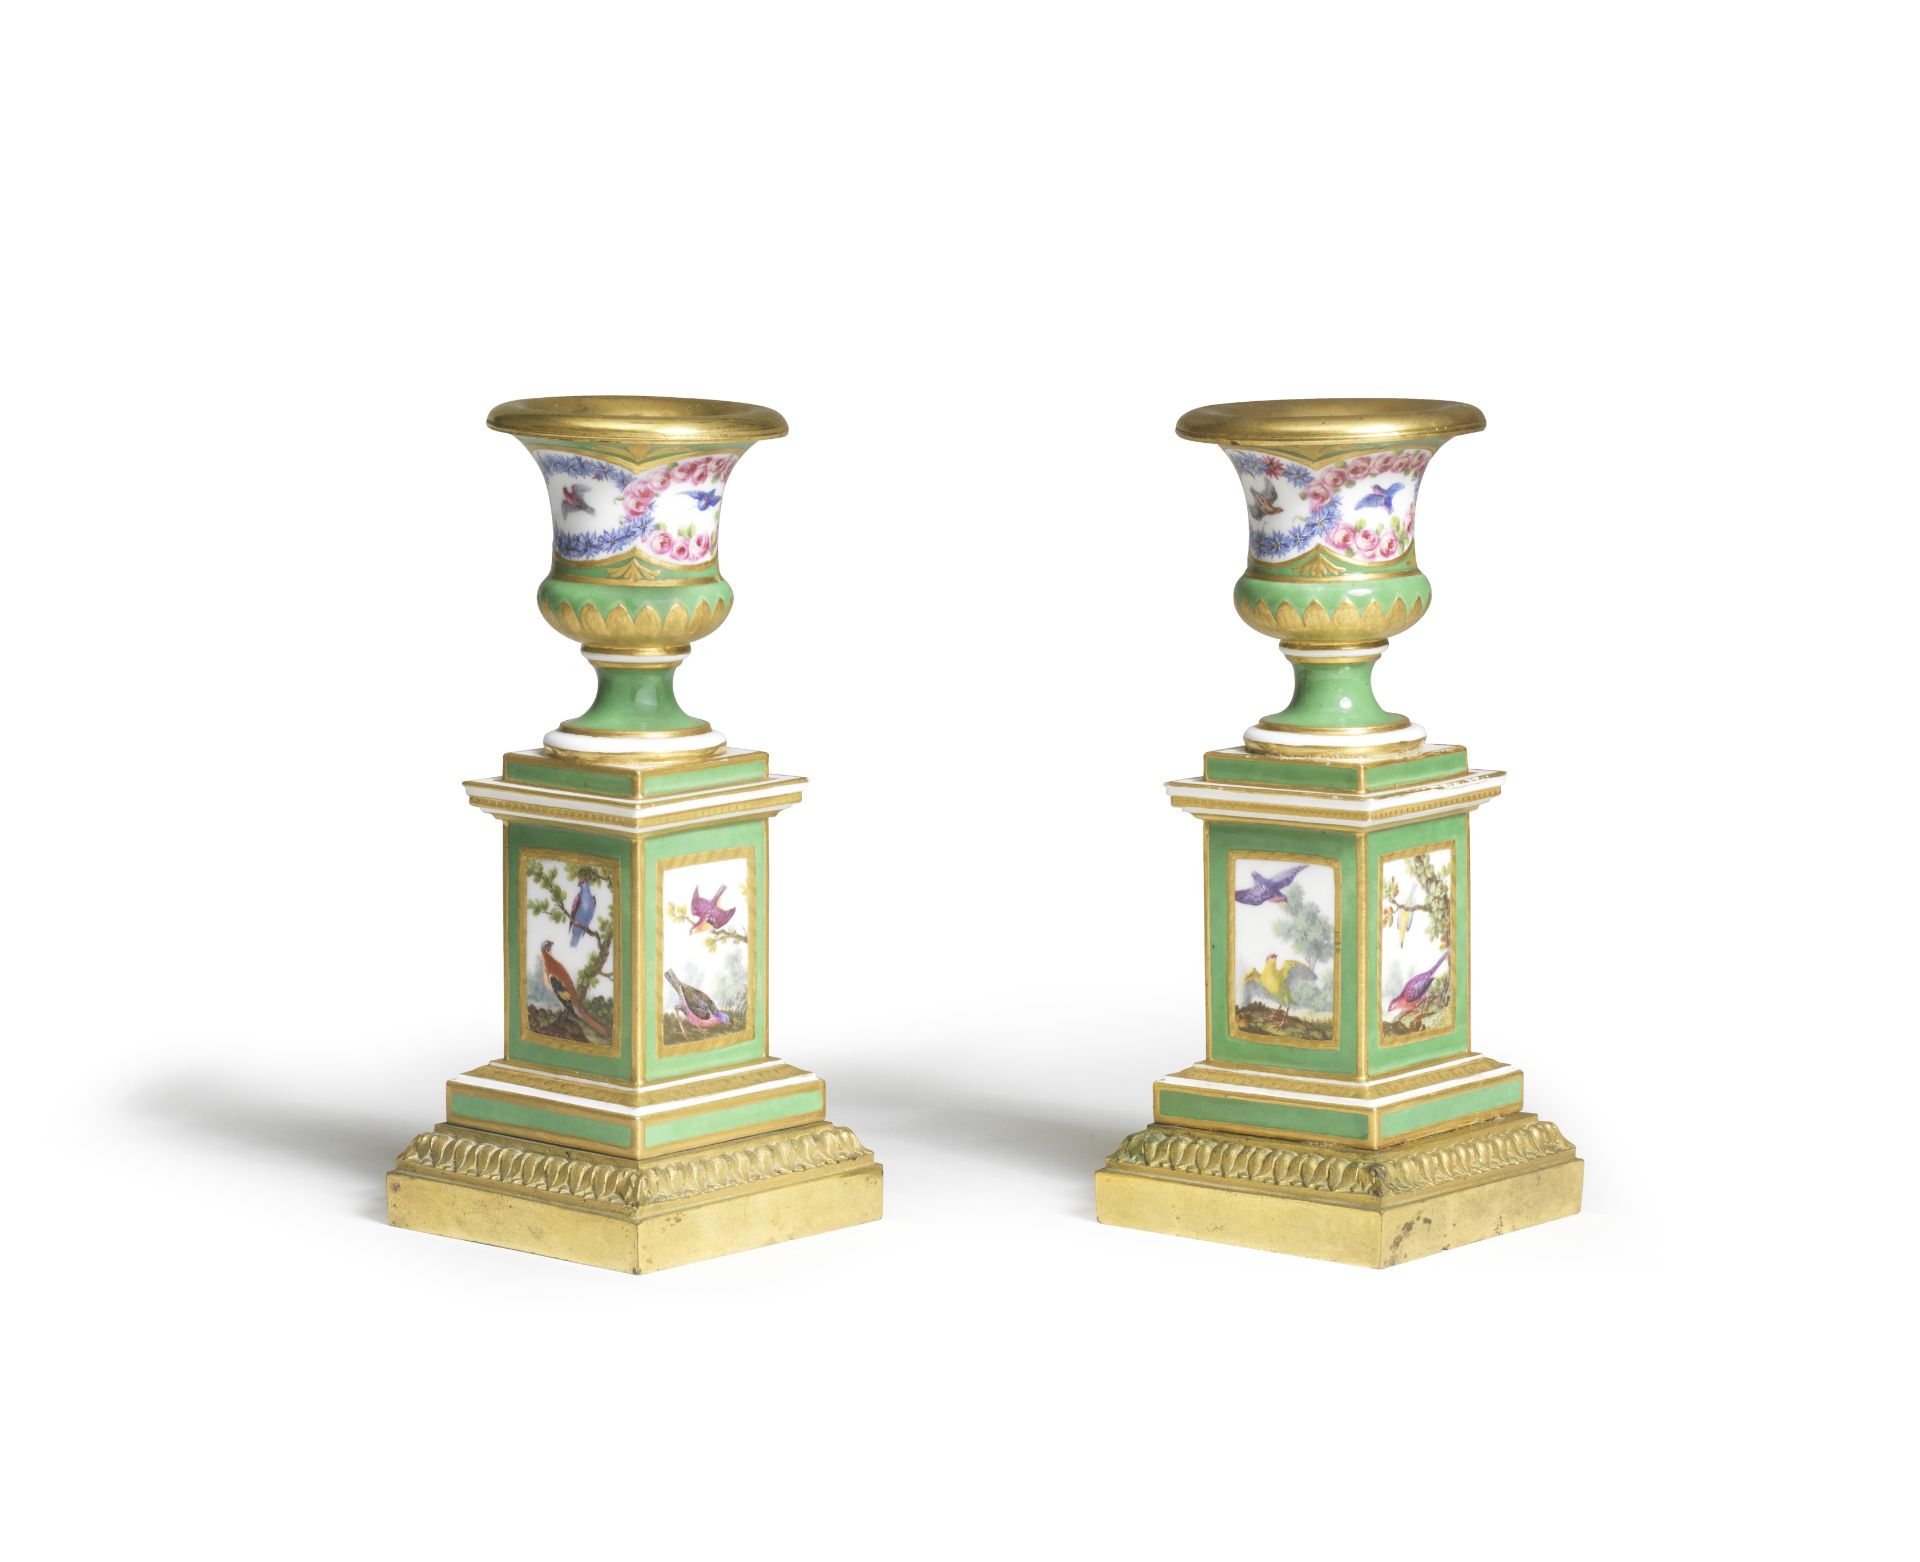 A pair of S&#232;vres green-ground gilt-metal mounted small vases, circa 1768-69